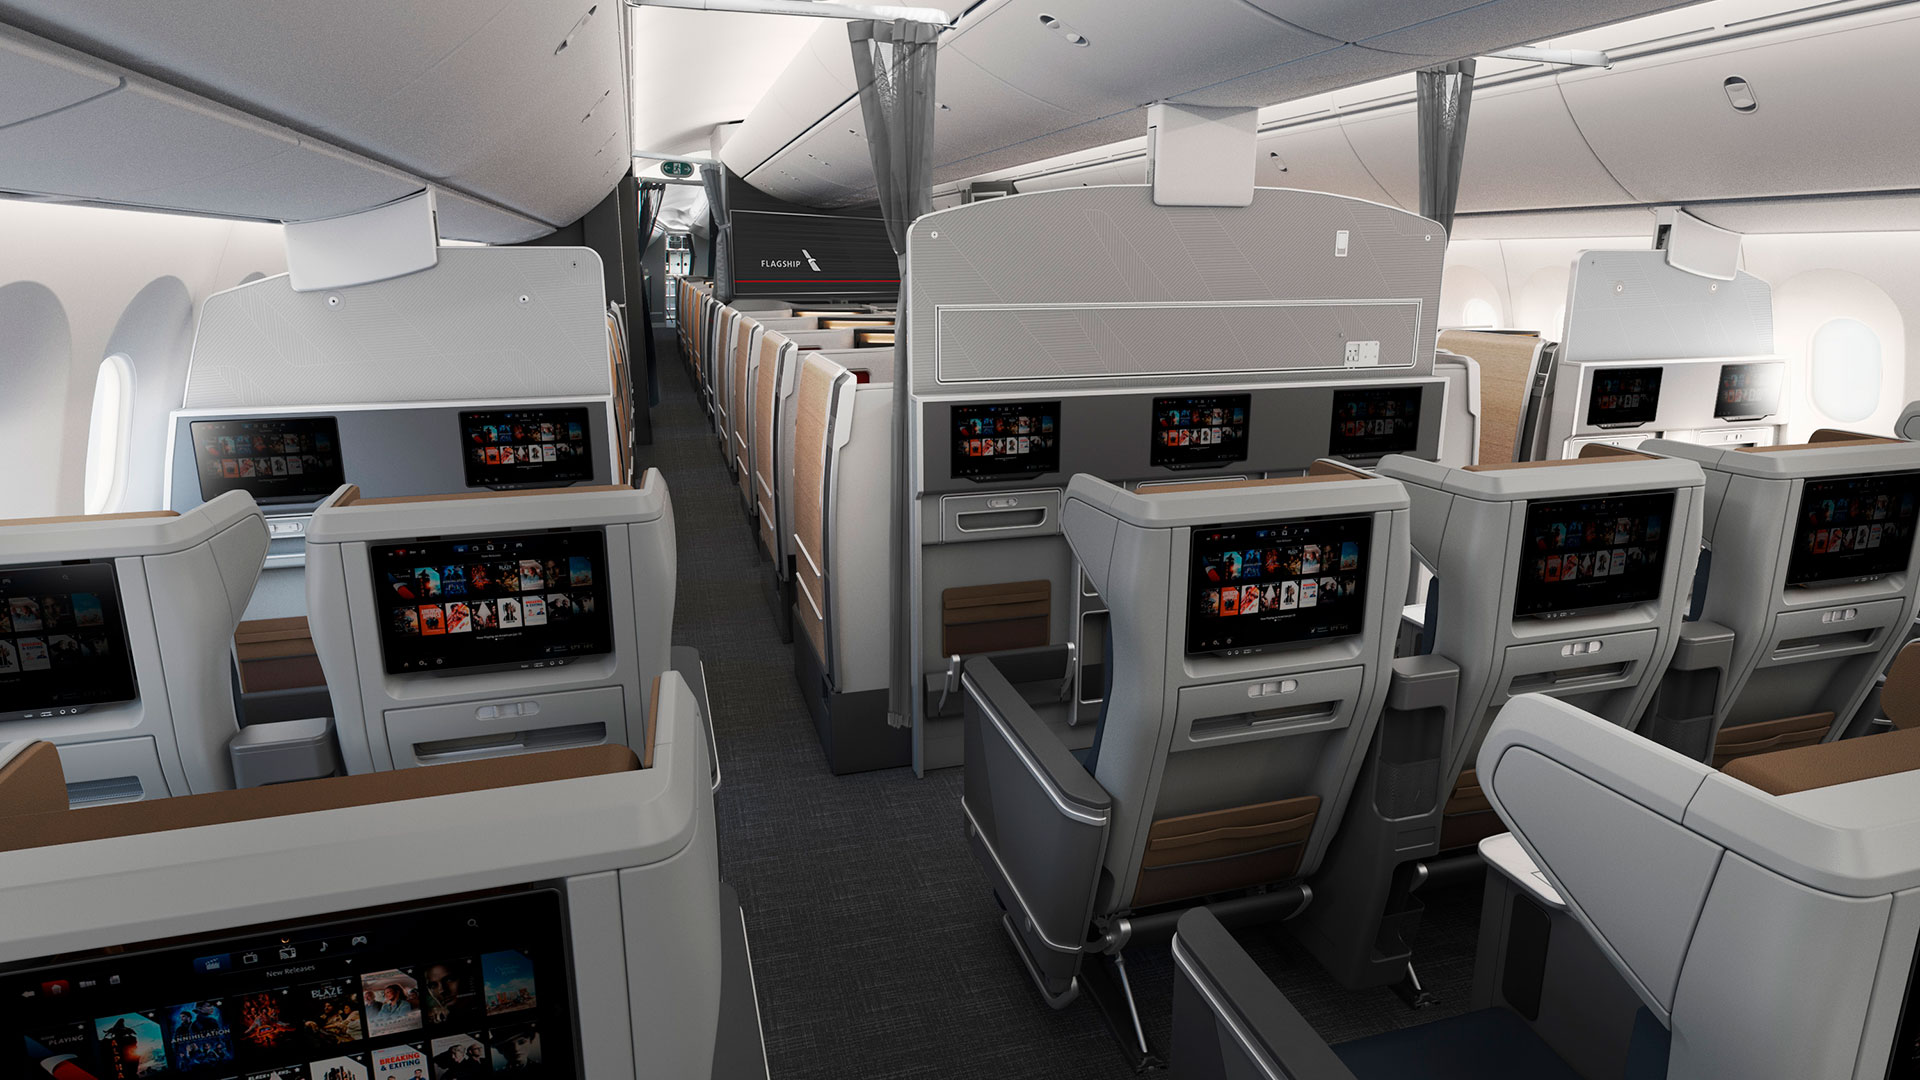 The Boeing 787-9 premium economy seats feature headrest wings for increased privacy and larger indoor entertainment screens